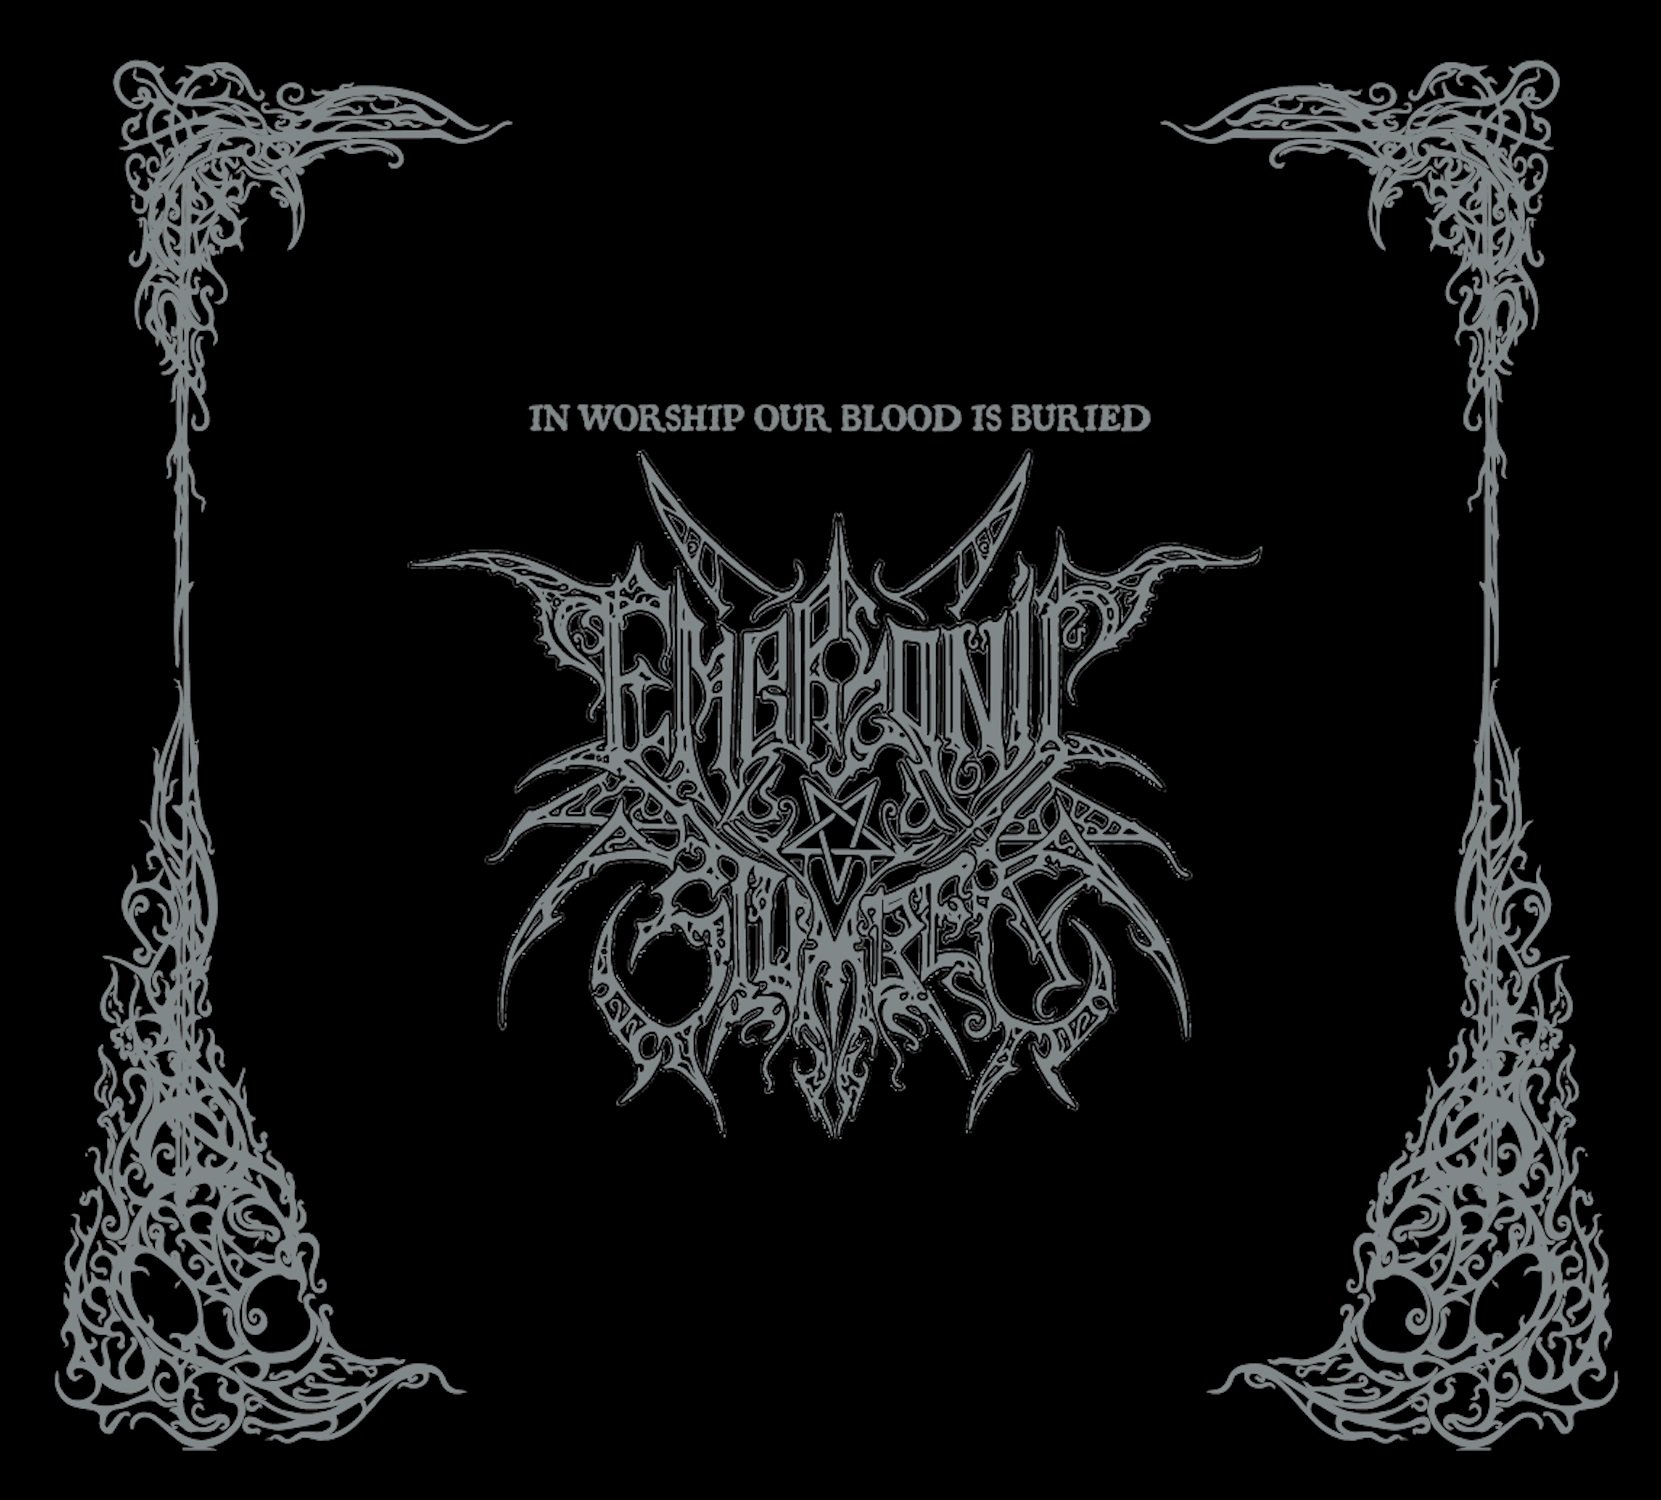 embryonic slumber – in worship our blood is buried